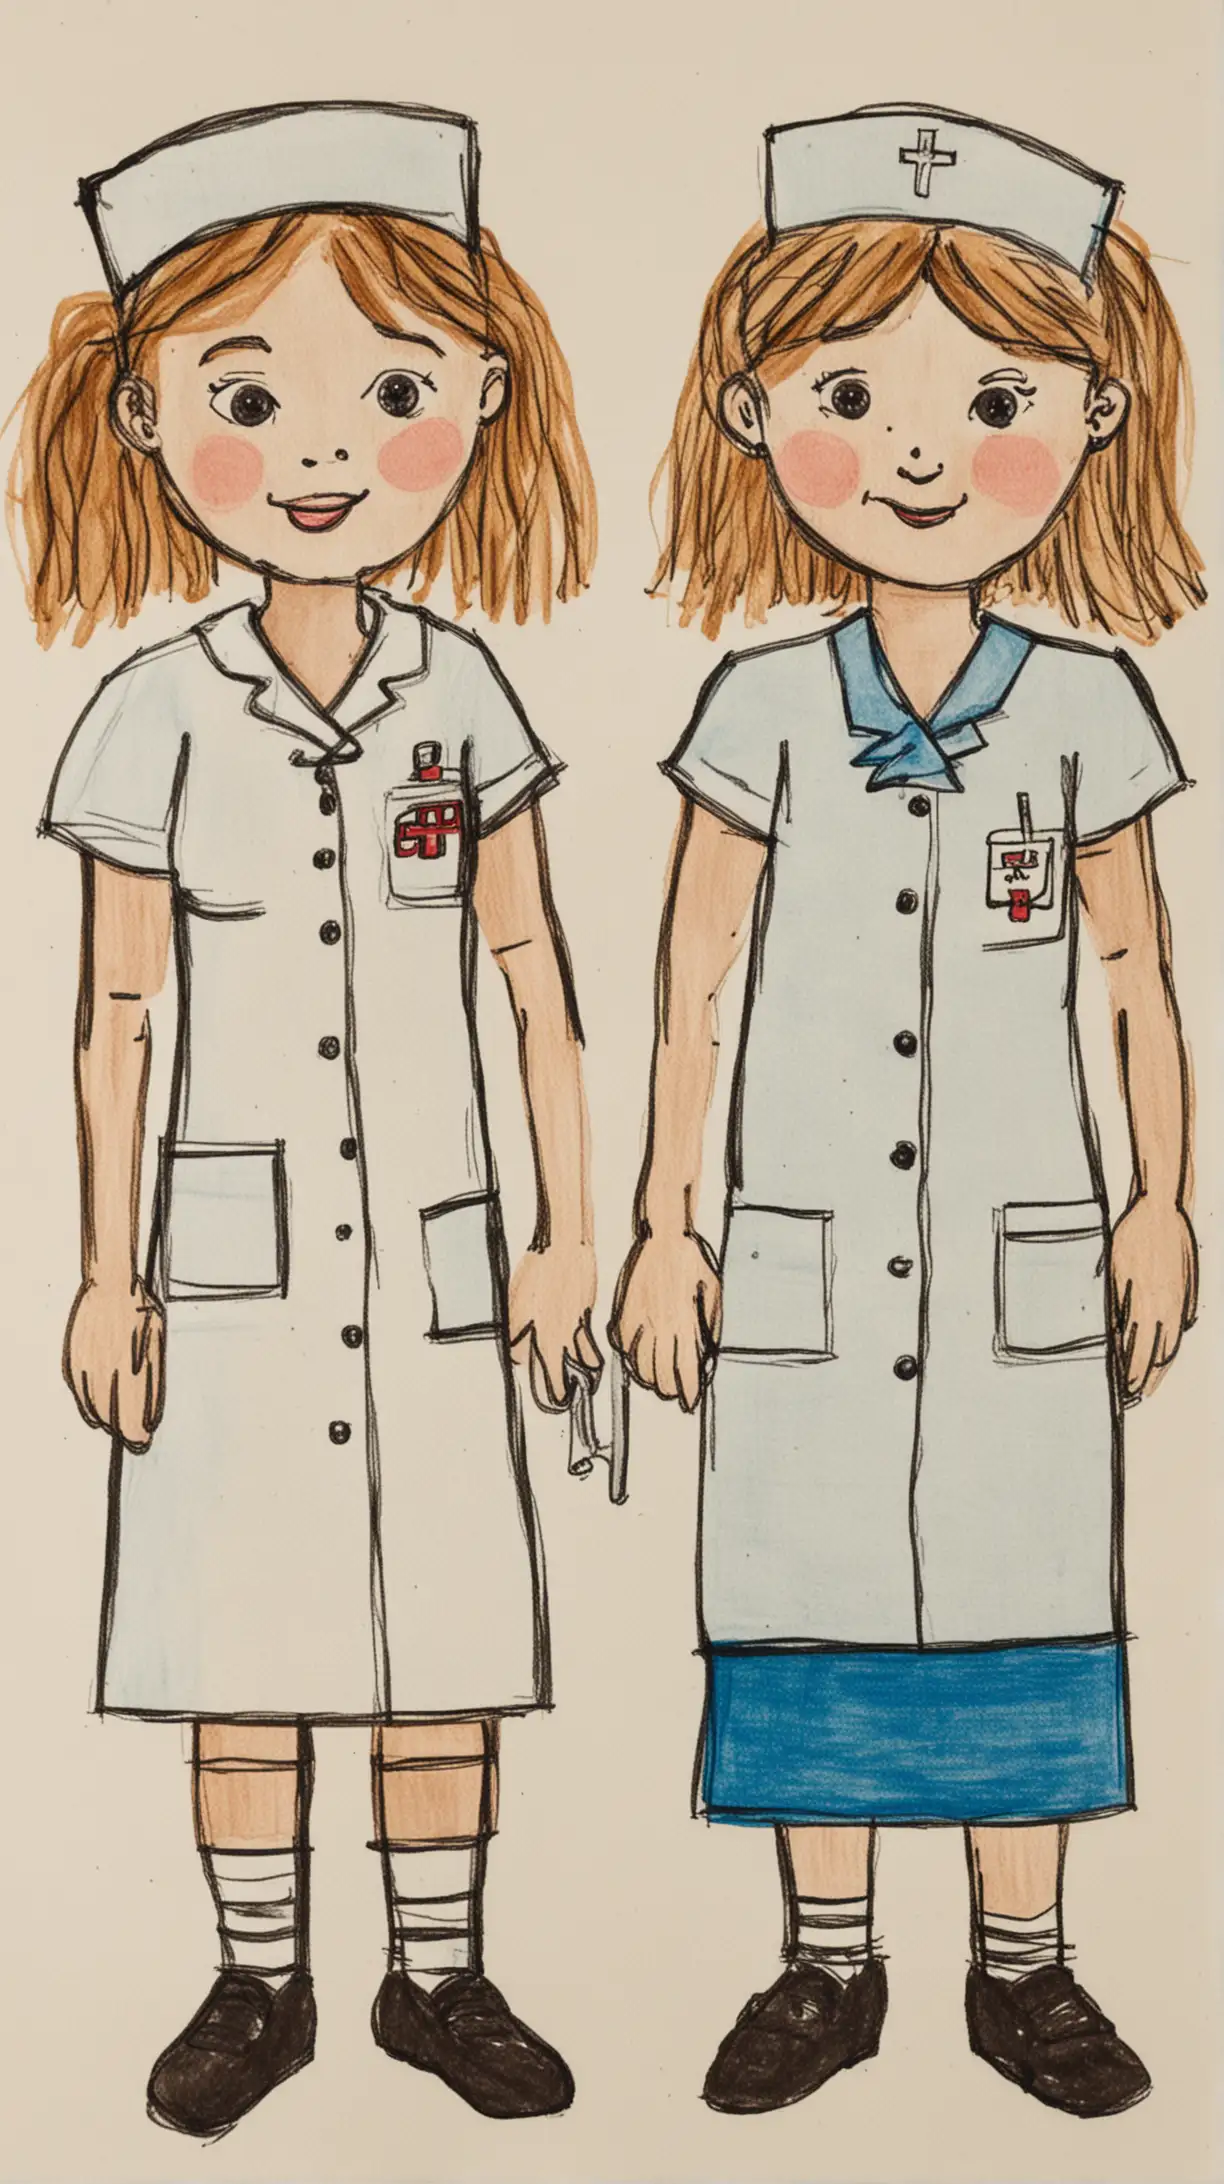 Childs Drawing of Nurses Playful Sketch with Cheerful Nurses in Action